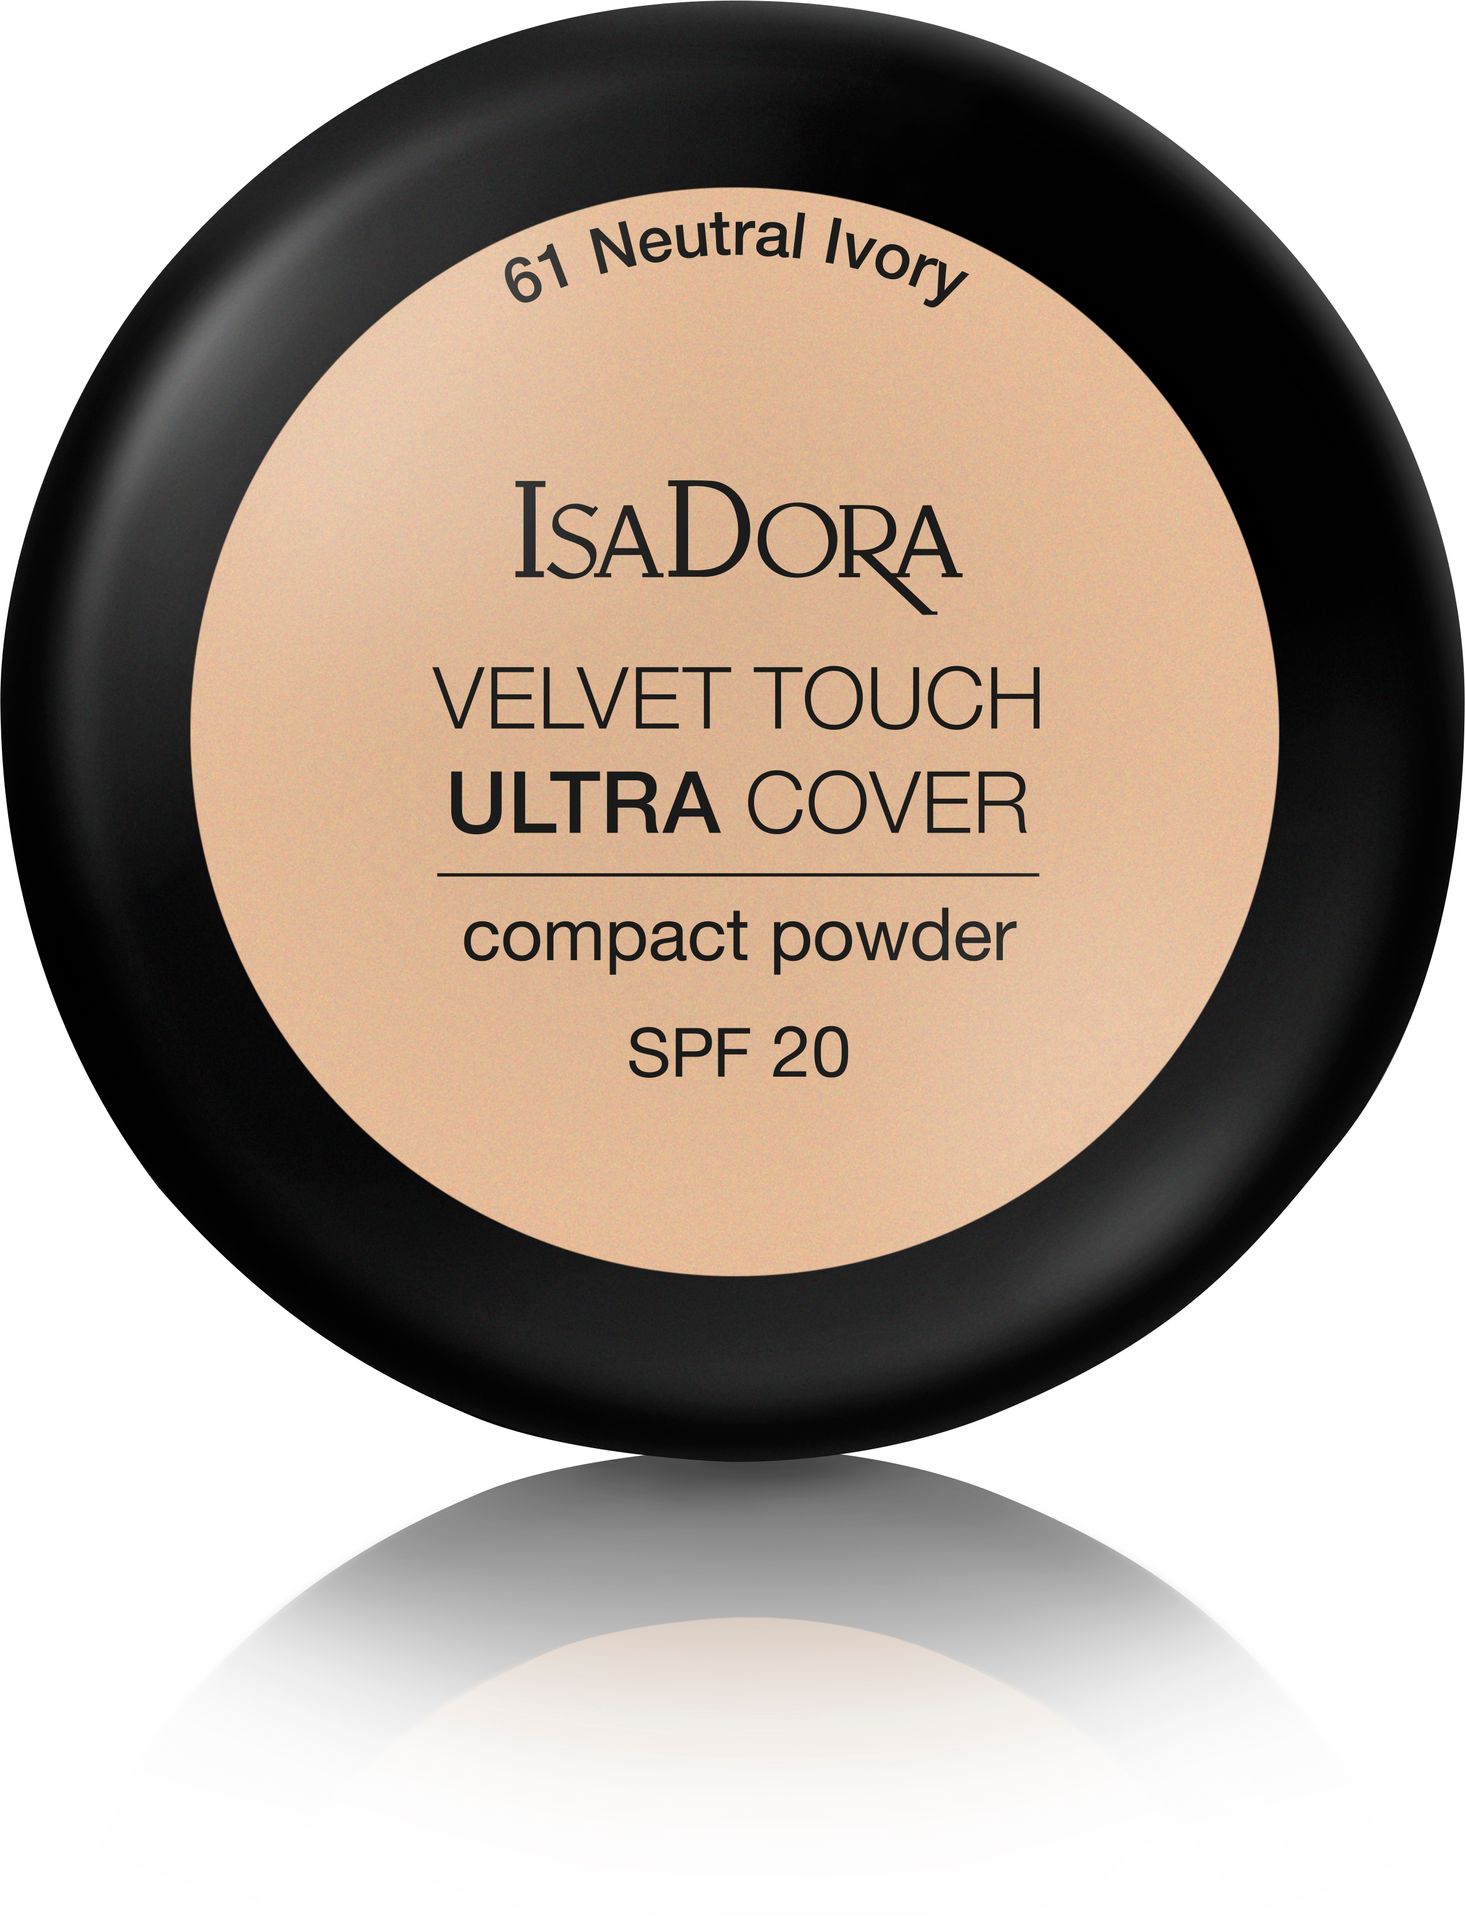 IsaDora Velvet Touch Ultra Cover SPF20 Compact Powder 61 Neutral Ivory 7,5g